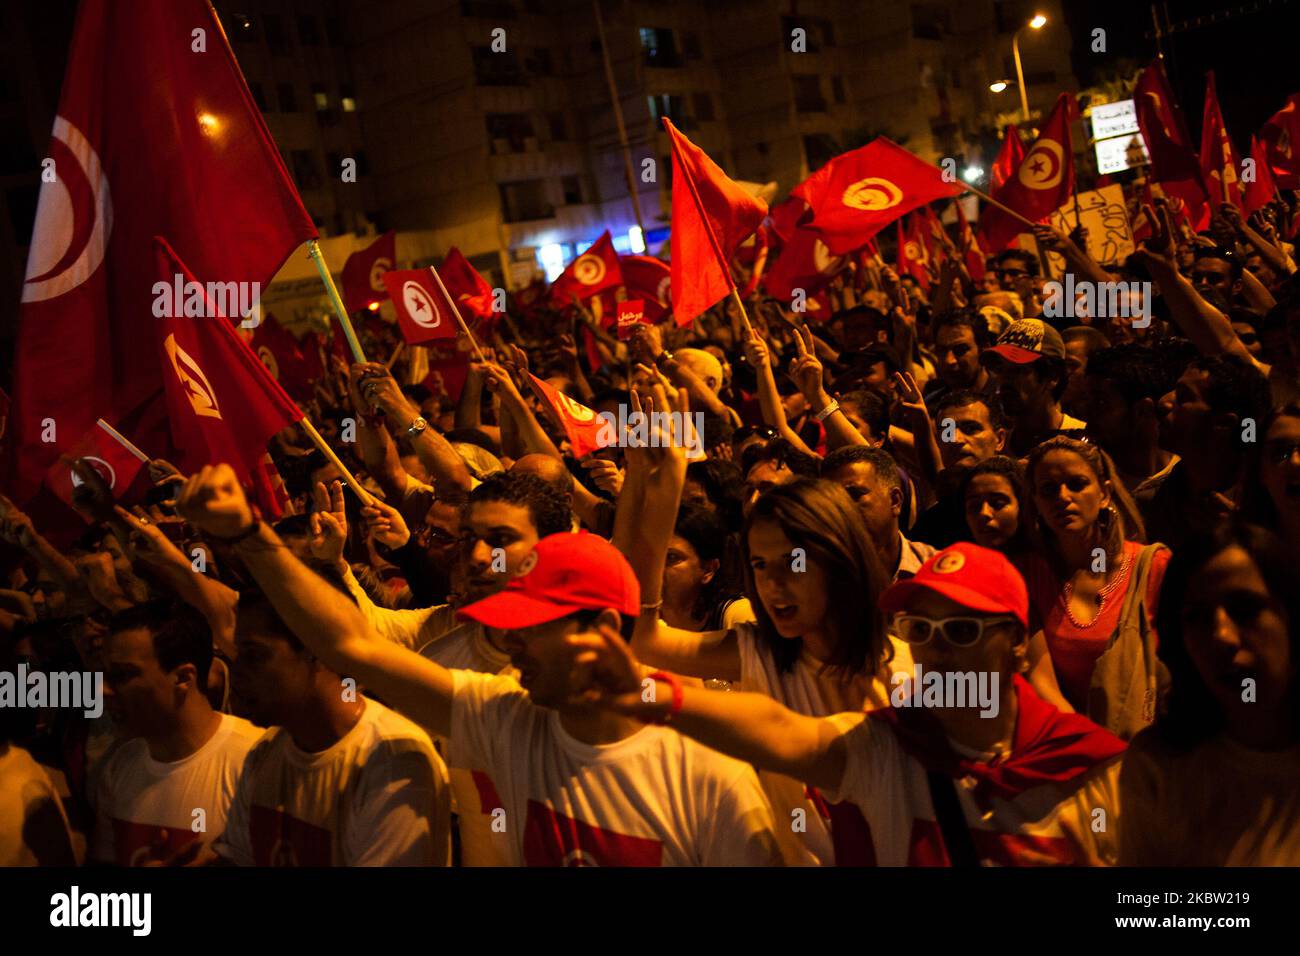 People wave a tunisien flag during a march outside the National Assembly at the bardo to mark the 40th day since the assassination of opposition politician Mohamed Brahmi. Brahmi was shot dead by unknown gunmen outside his home. On 7 September 2013, in Tunis, Tunisia. (Photo by Emeric Fohlen/NurPhoto) Stock Photo